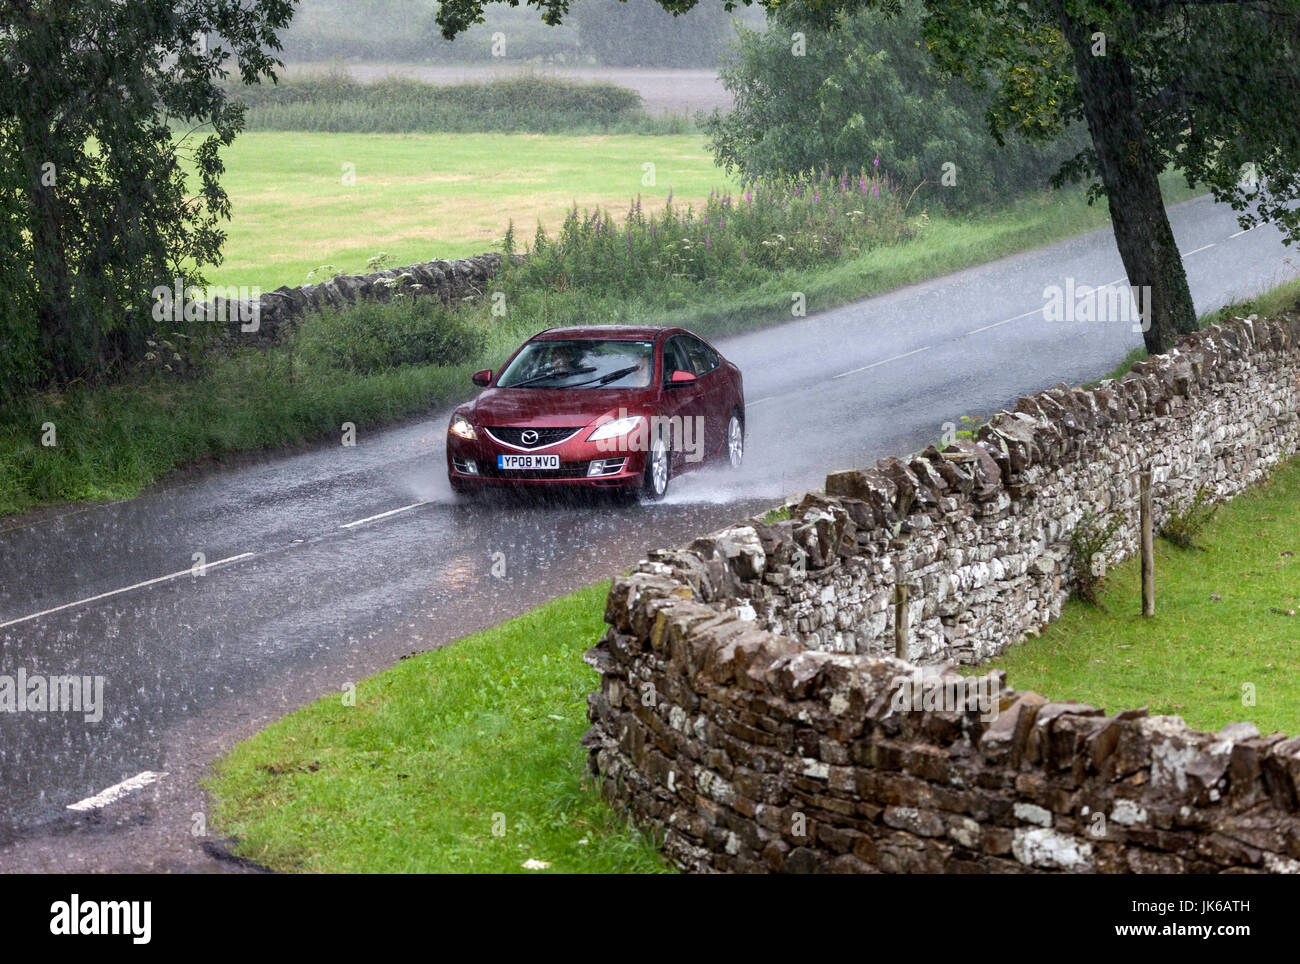 B6278, Barnard Castle, County Durham UK.  Saturday 22nd July 2017. UK Weather.  Torrential downpours are creating hazardous driving conditions on the B6278 in County Durham this afternoon. Credit: David Forster/Alamy Live News. Stock Photo